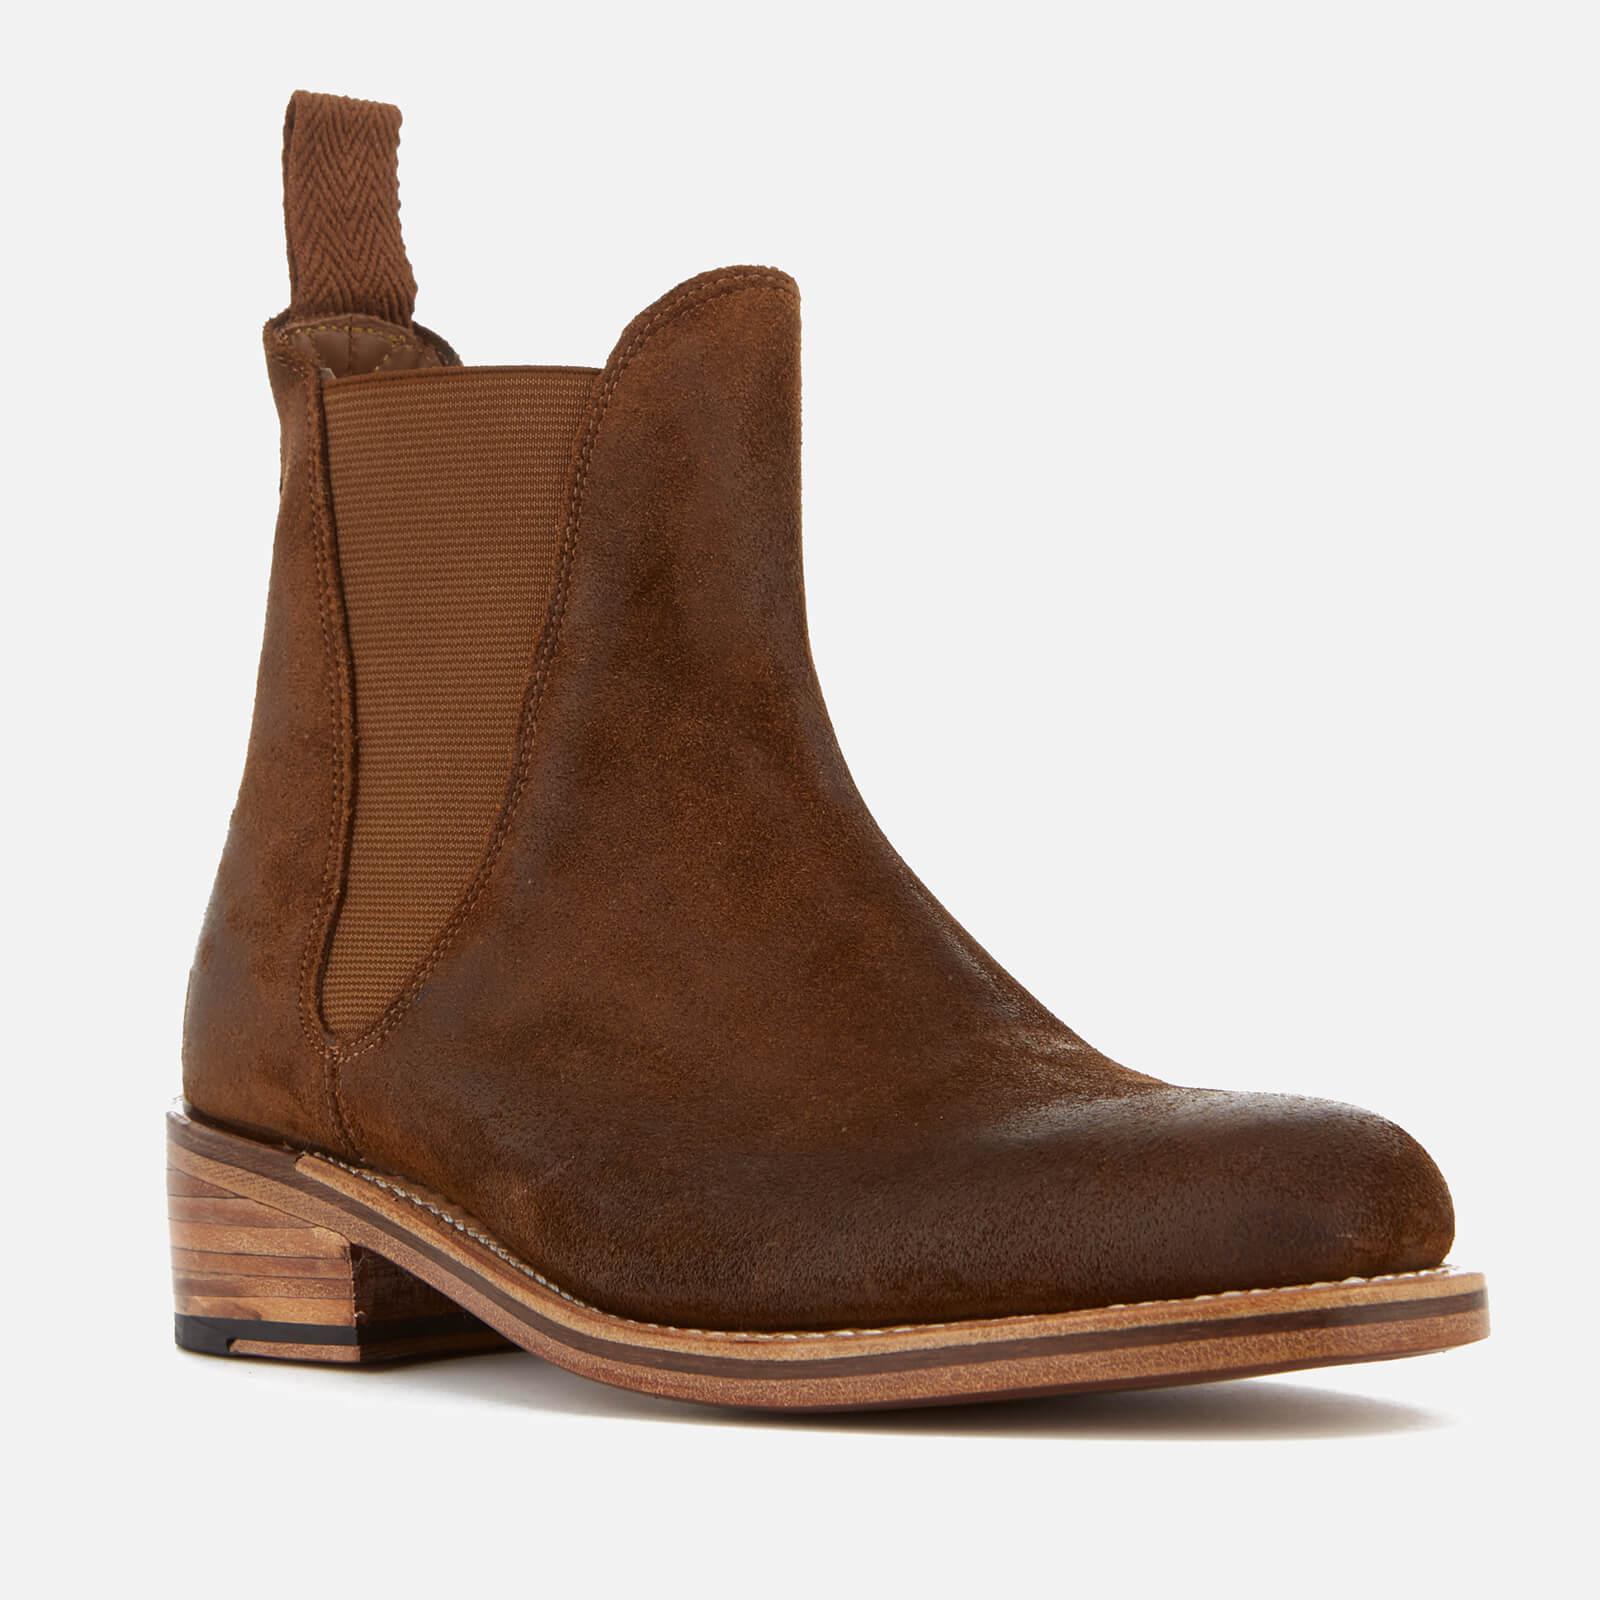 Brown Suede Chelsea Boots Women : Ecstasy-BROWN SUEDE LEATHER CHELSEA ...